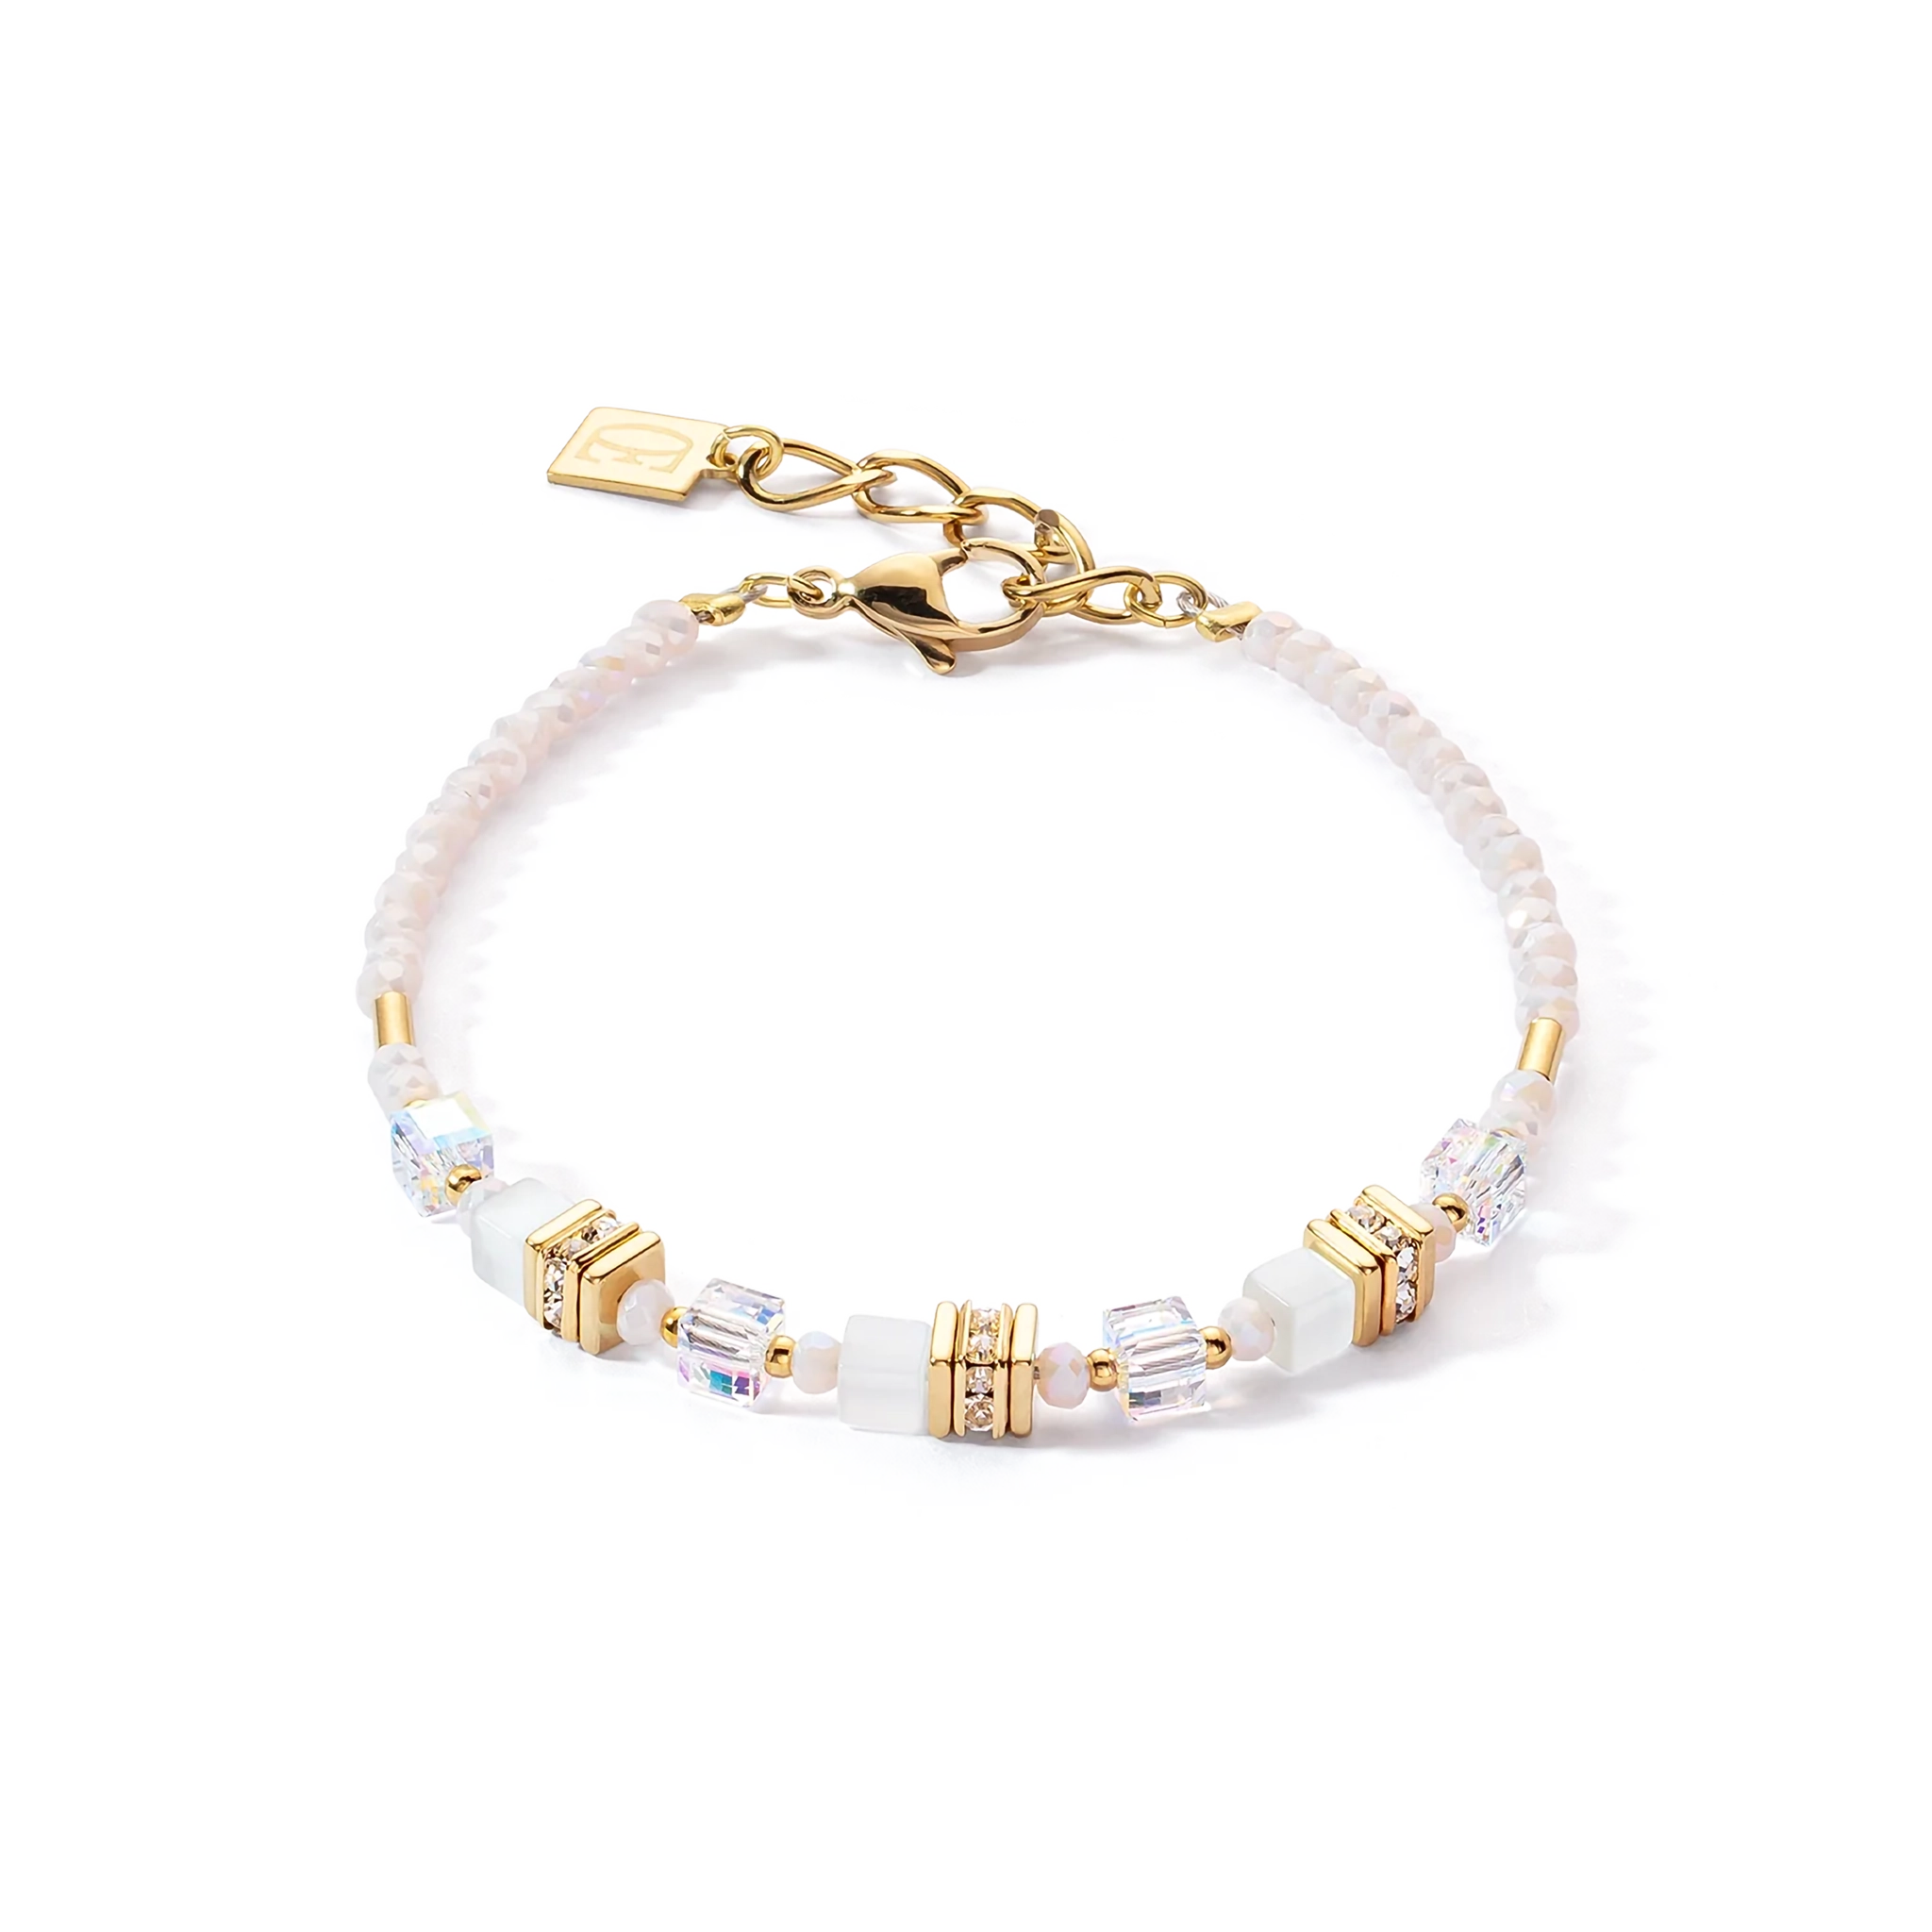 A bracelet with white and gold mini cube shaped stones and cut glass beads